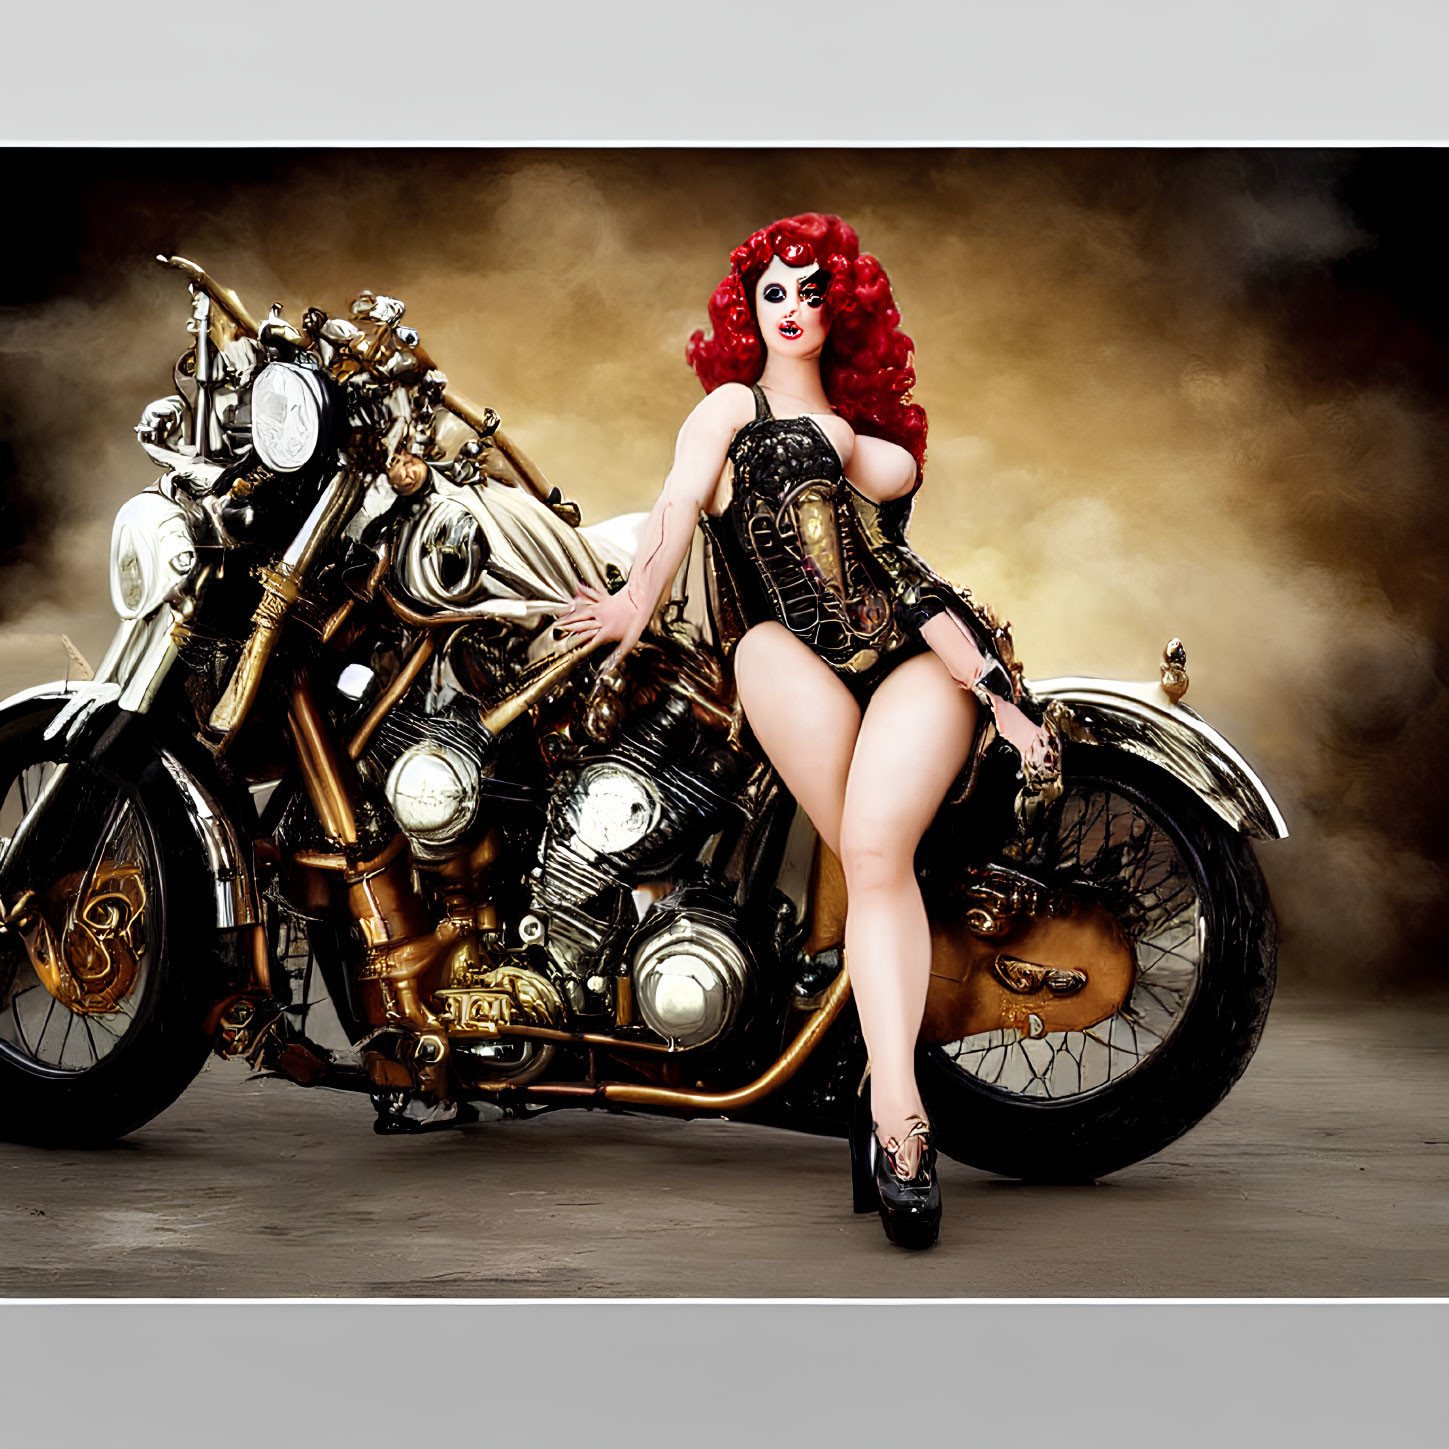 Red-haired person with curly hair posing next to metallic motorcycle on tan backdrop